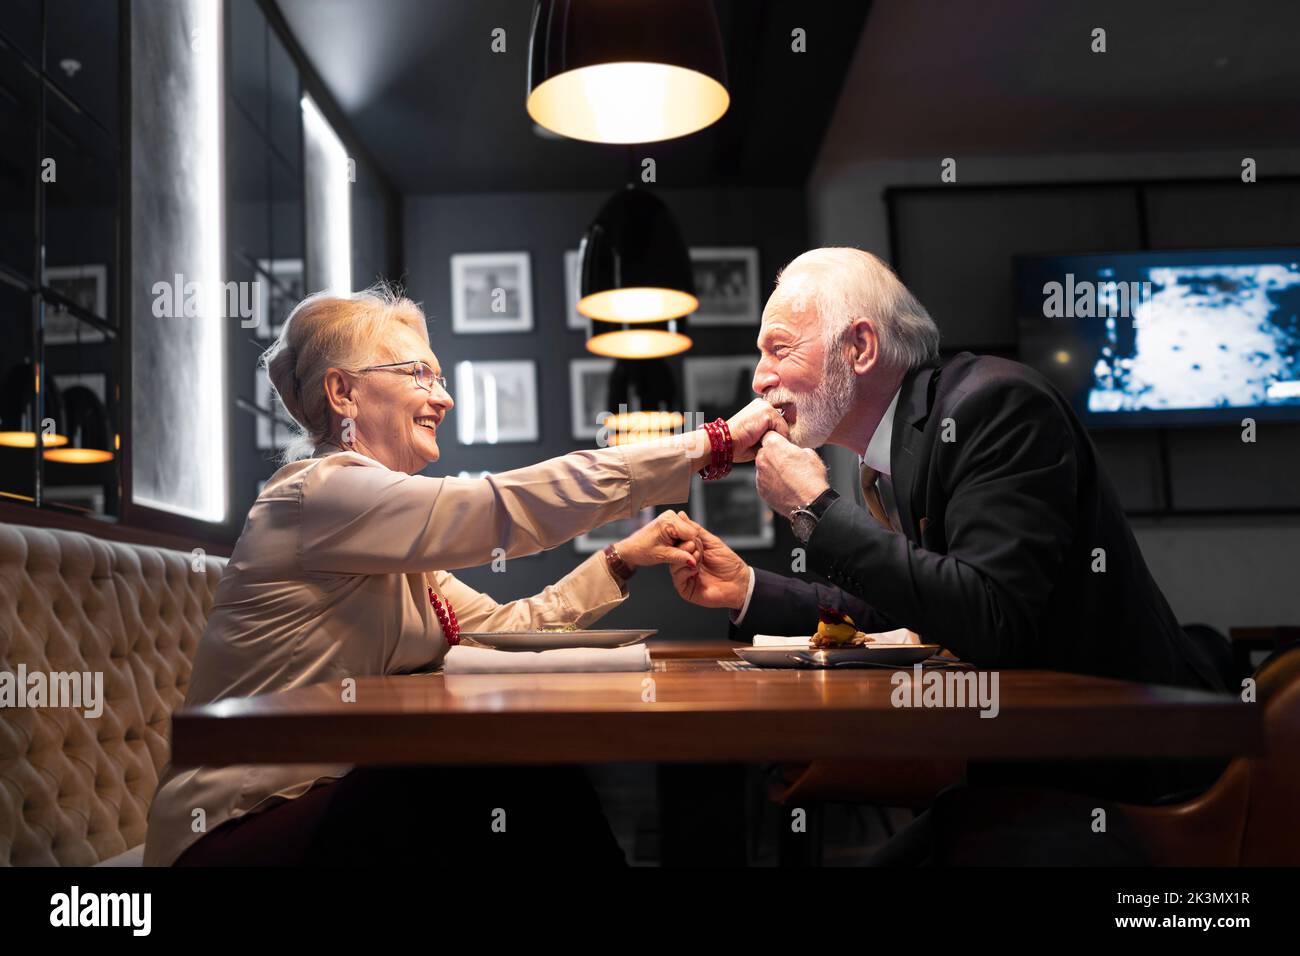 Elderly man kissing a hand of his partner during the Christmas dessert Stock Photo